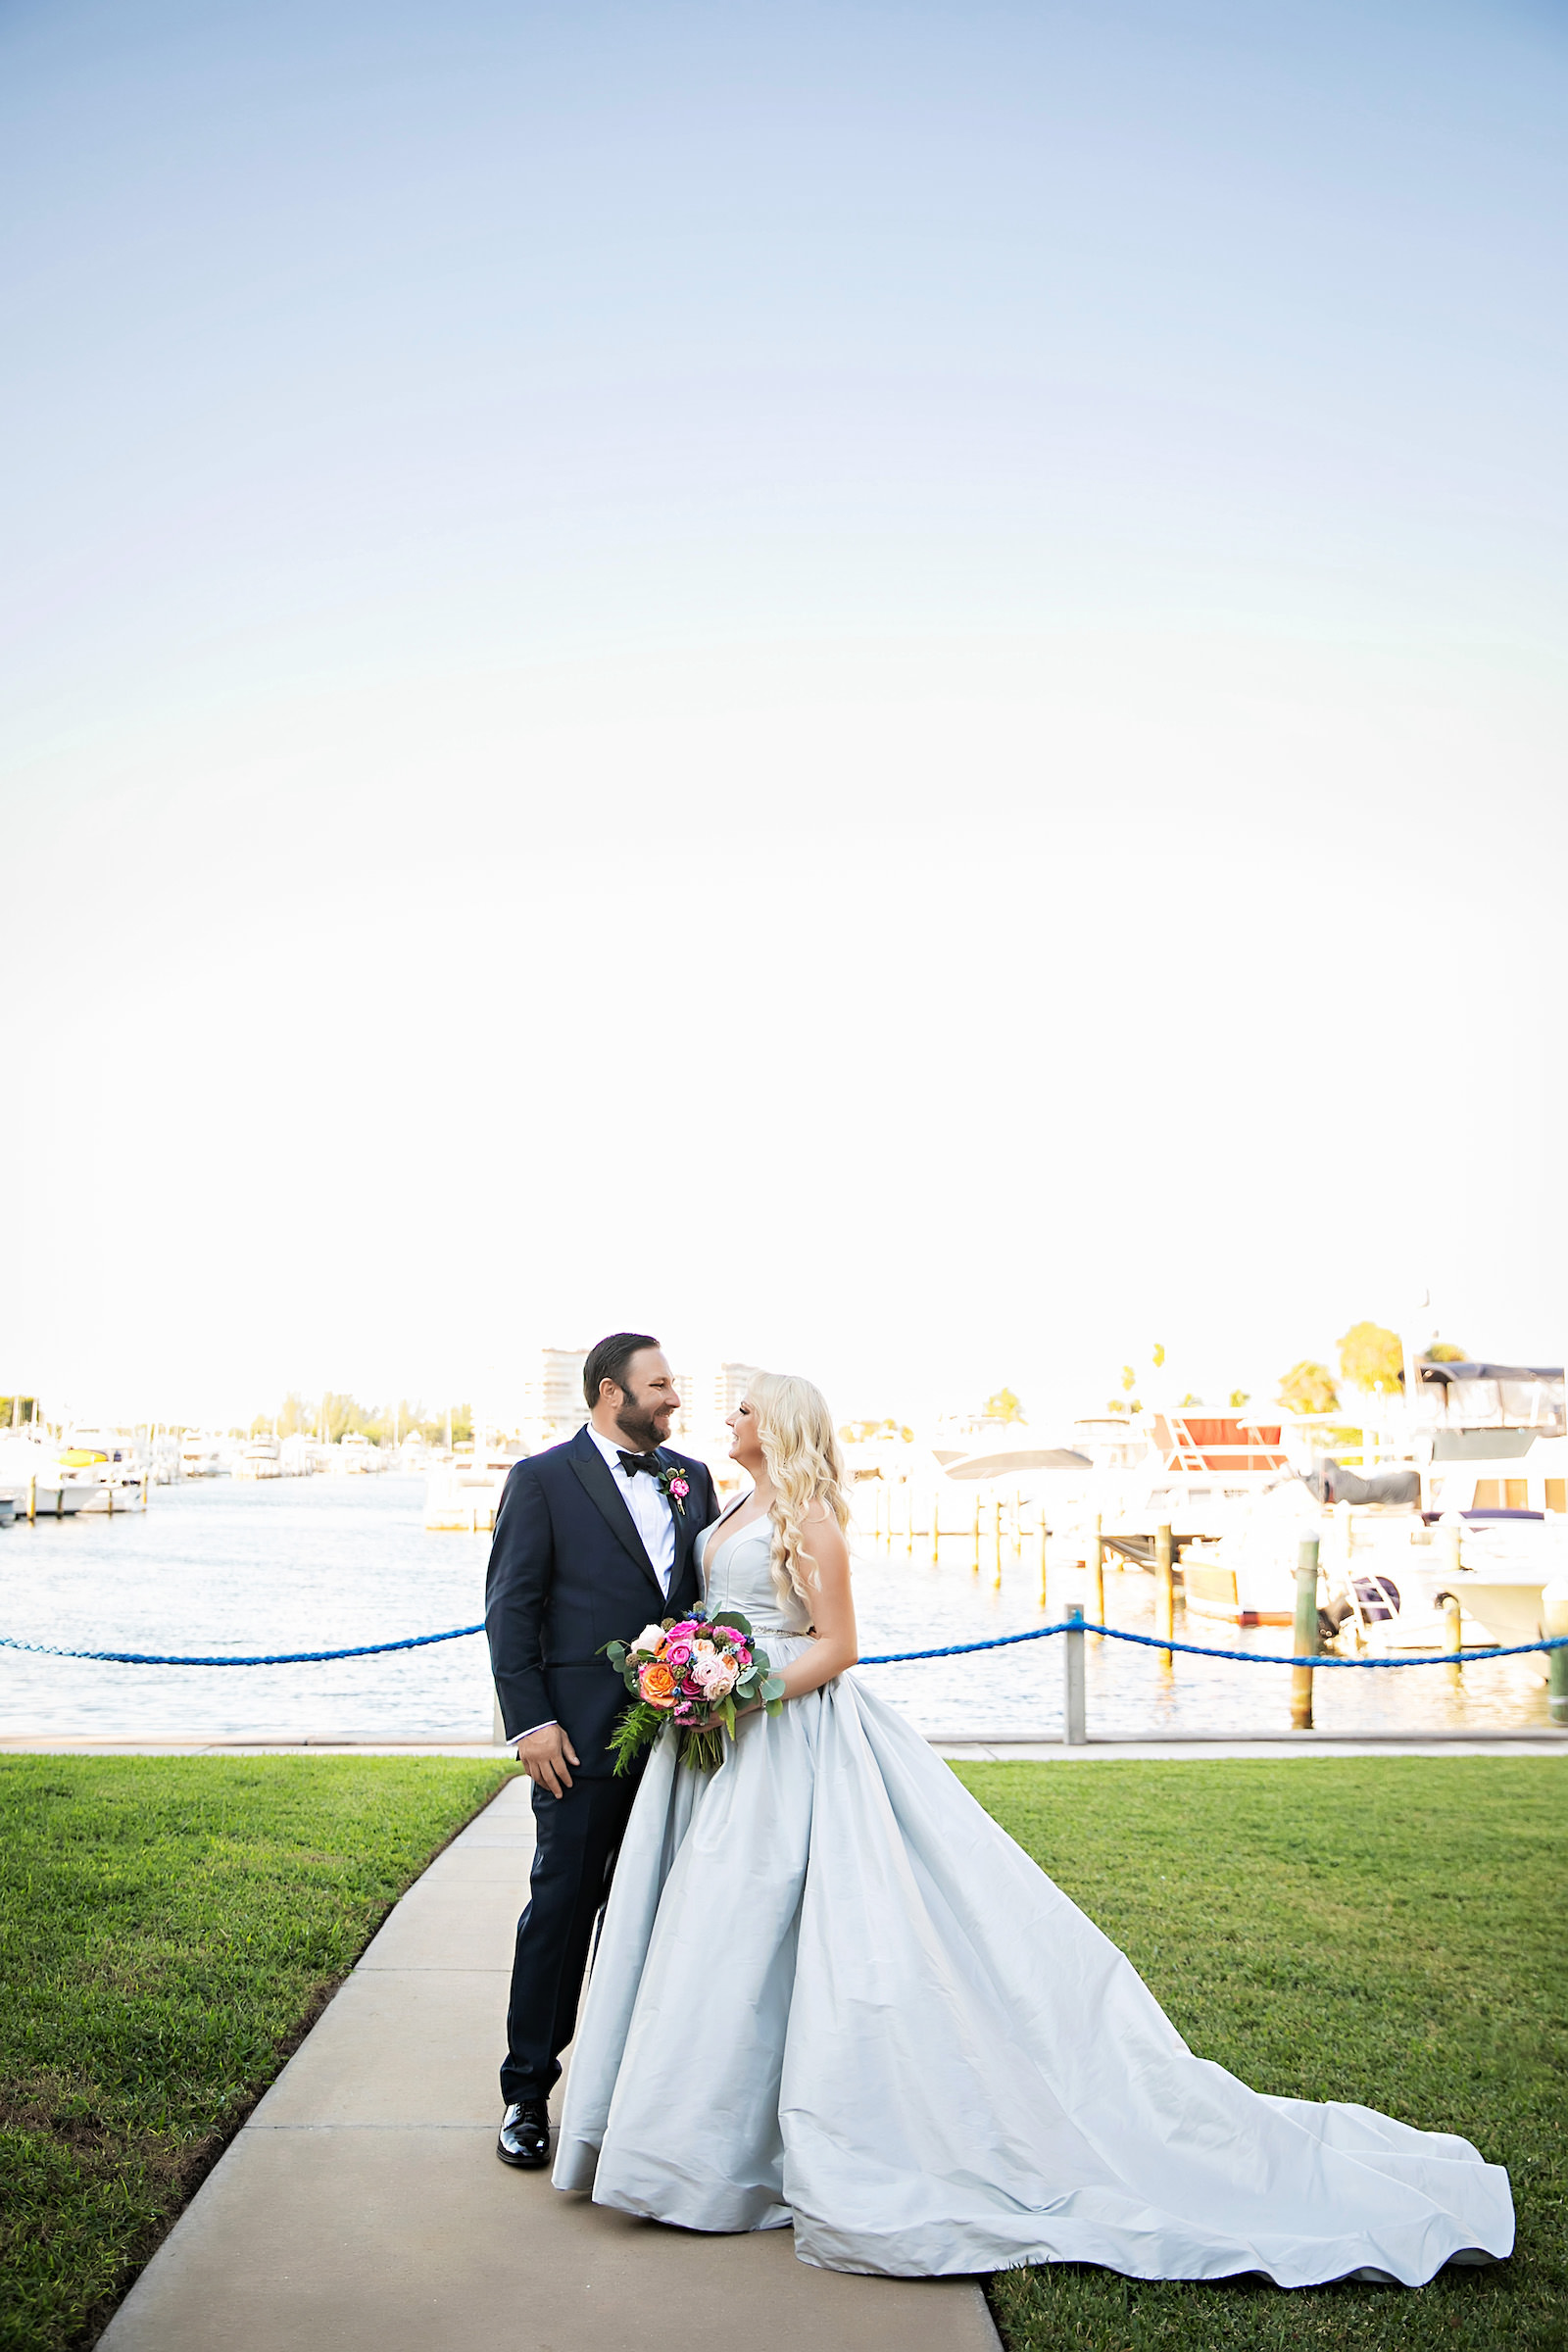 Bride and Groom Waterfront Wedding Portrait | Photographer Limelight Photography